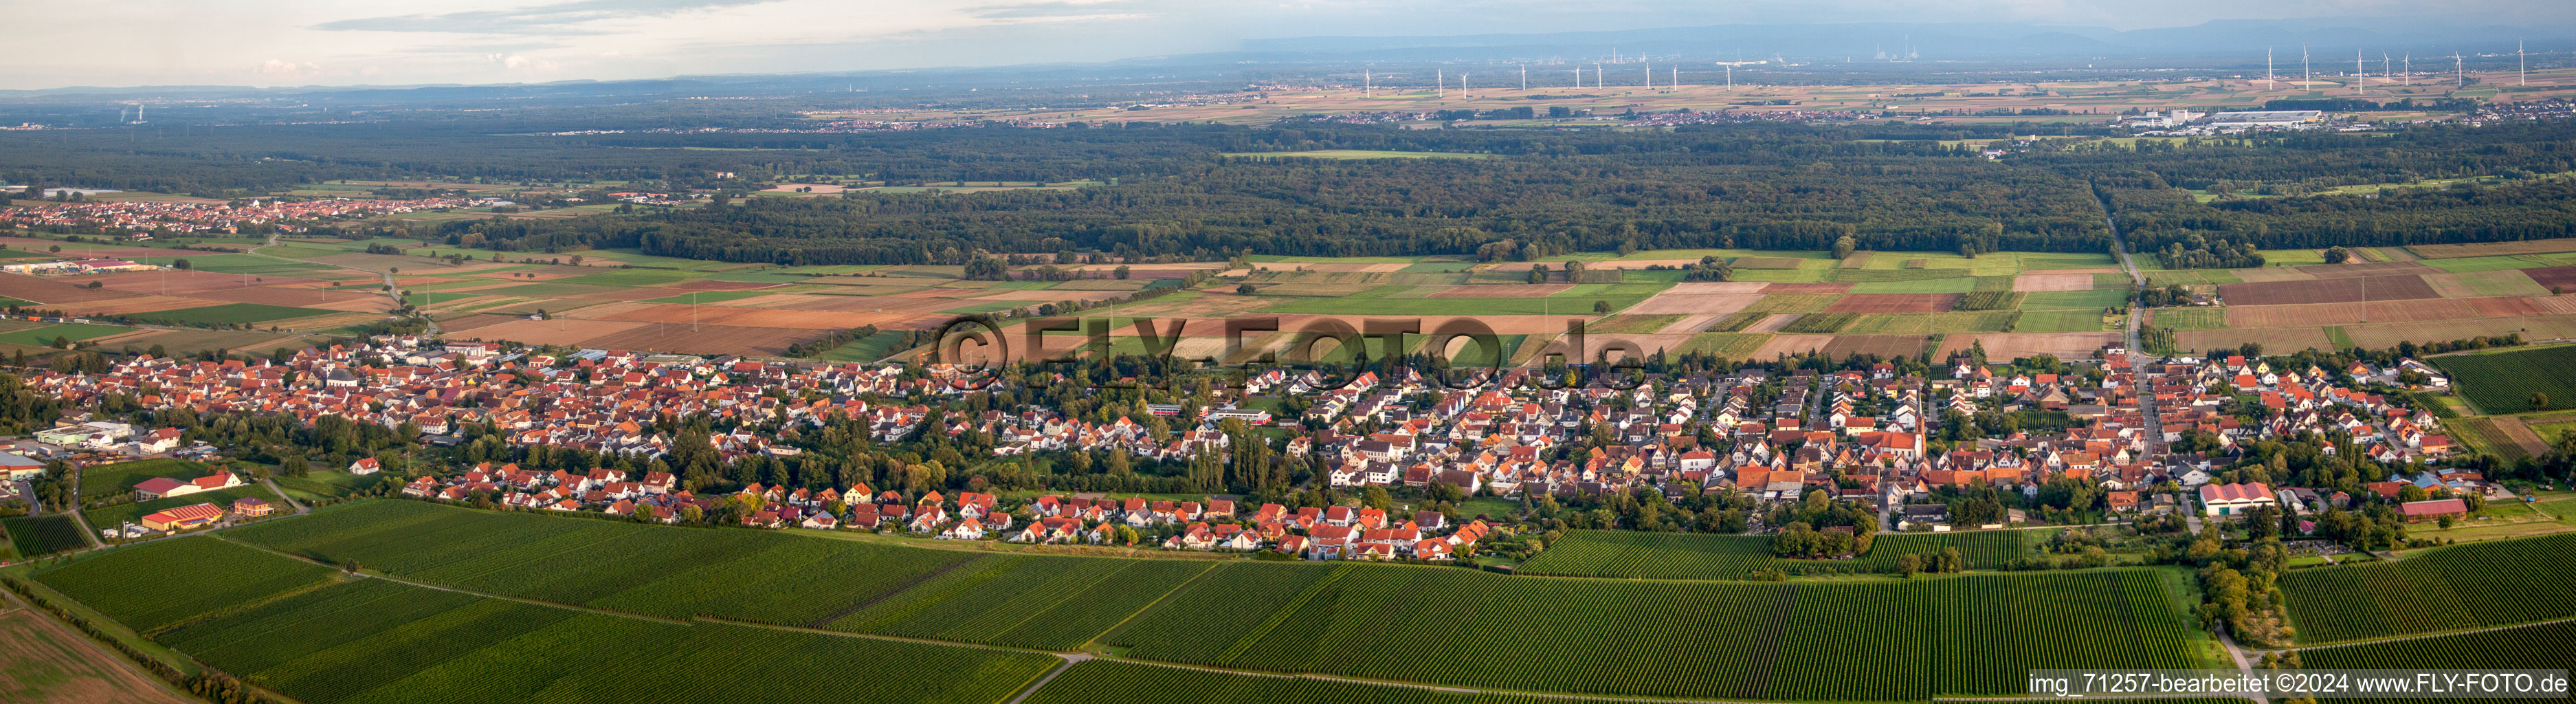 Aerial view of Panoramic perspective Village - view on the edge of agricultural fields and farmland in Hochstadt (Pfalz) in the state Rhineland-Palatinate, Germany